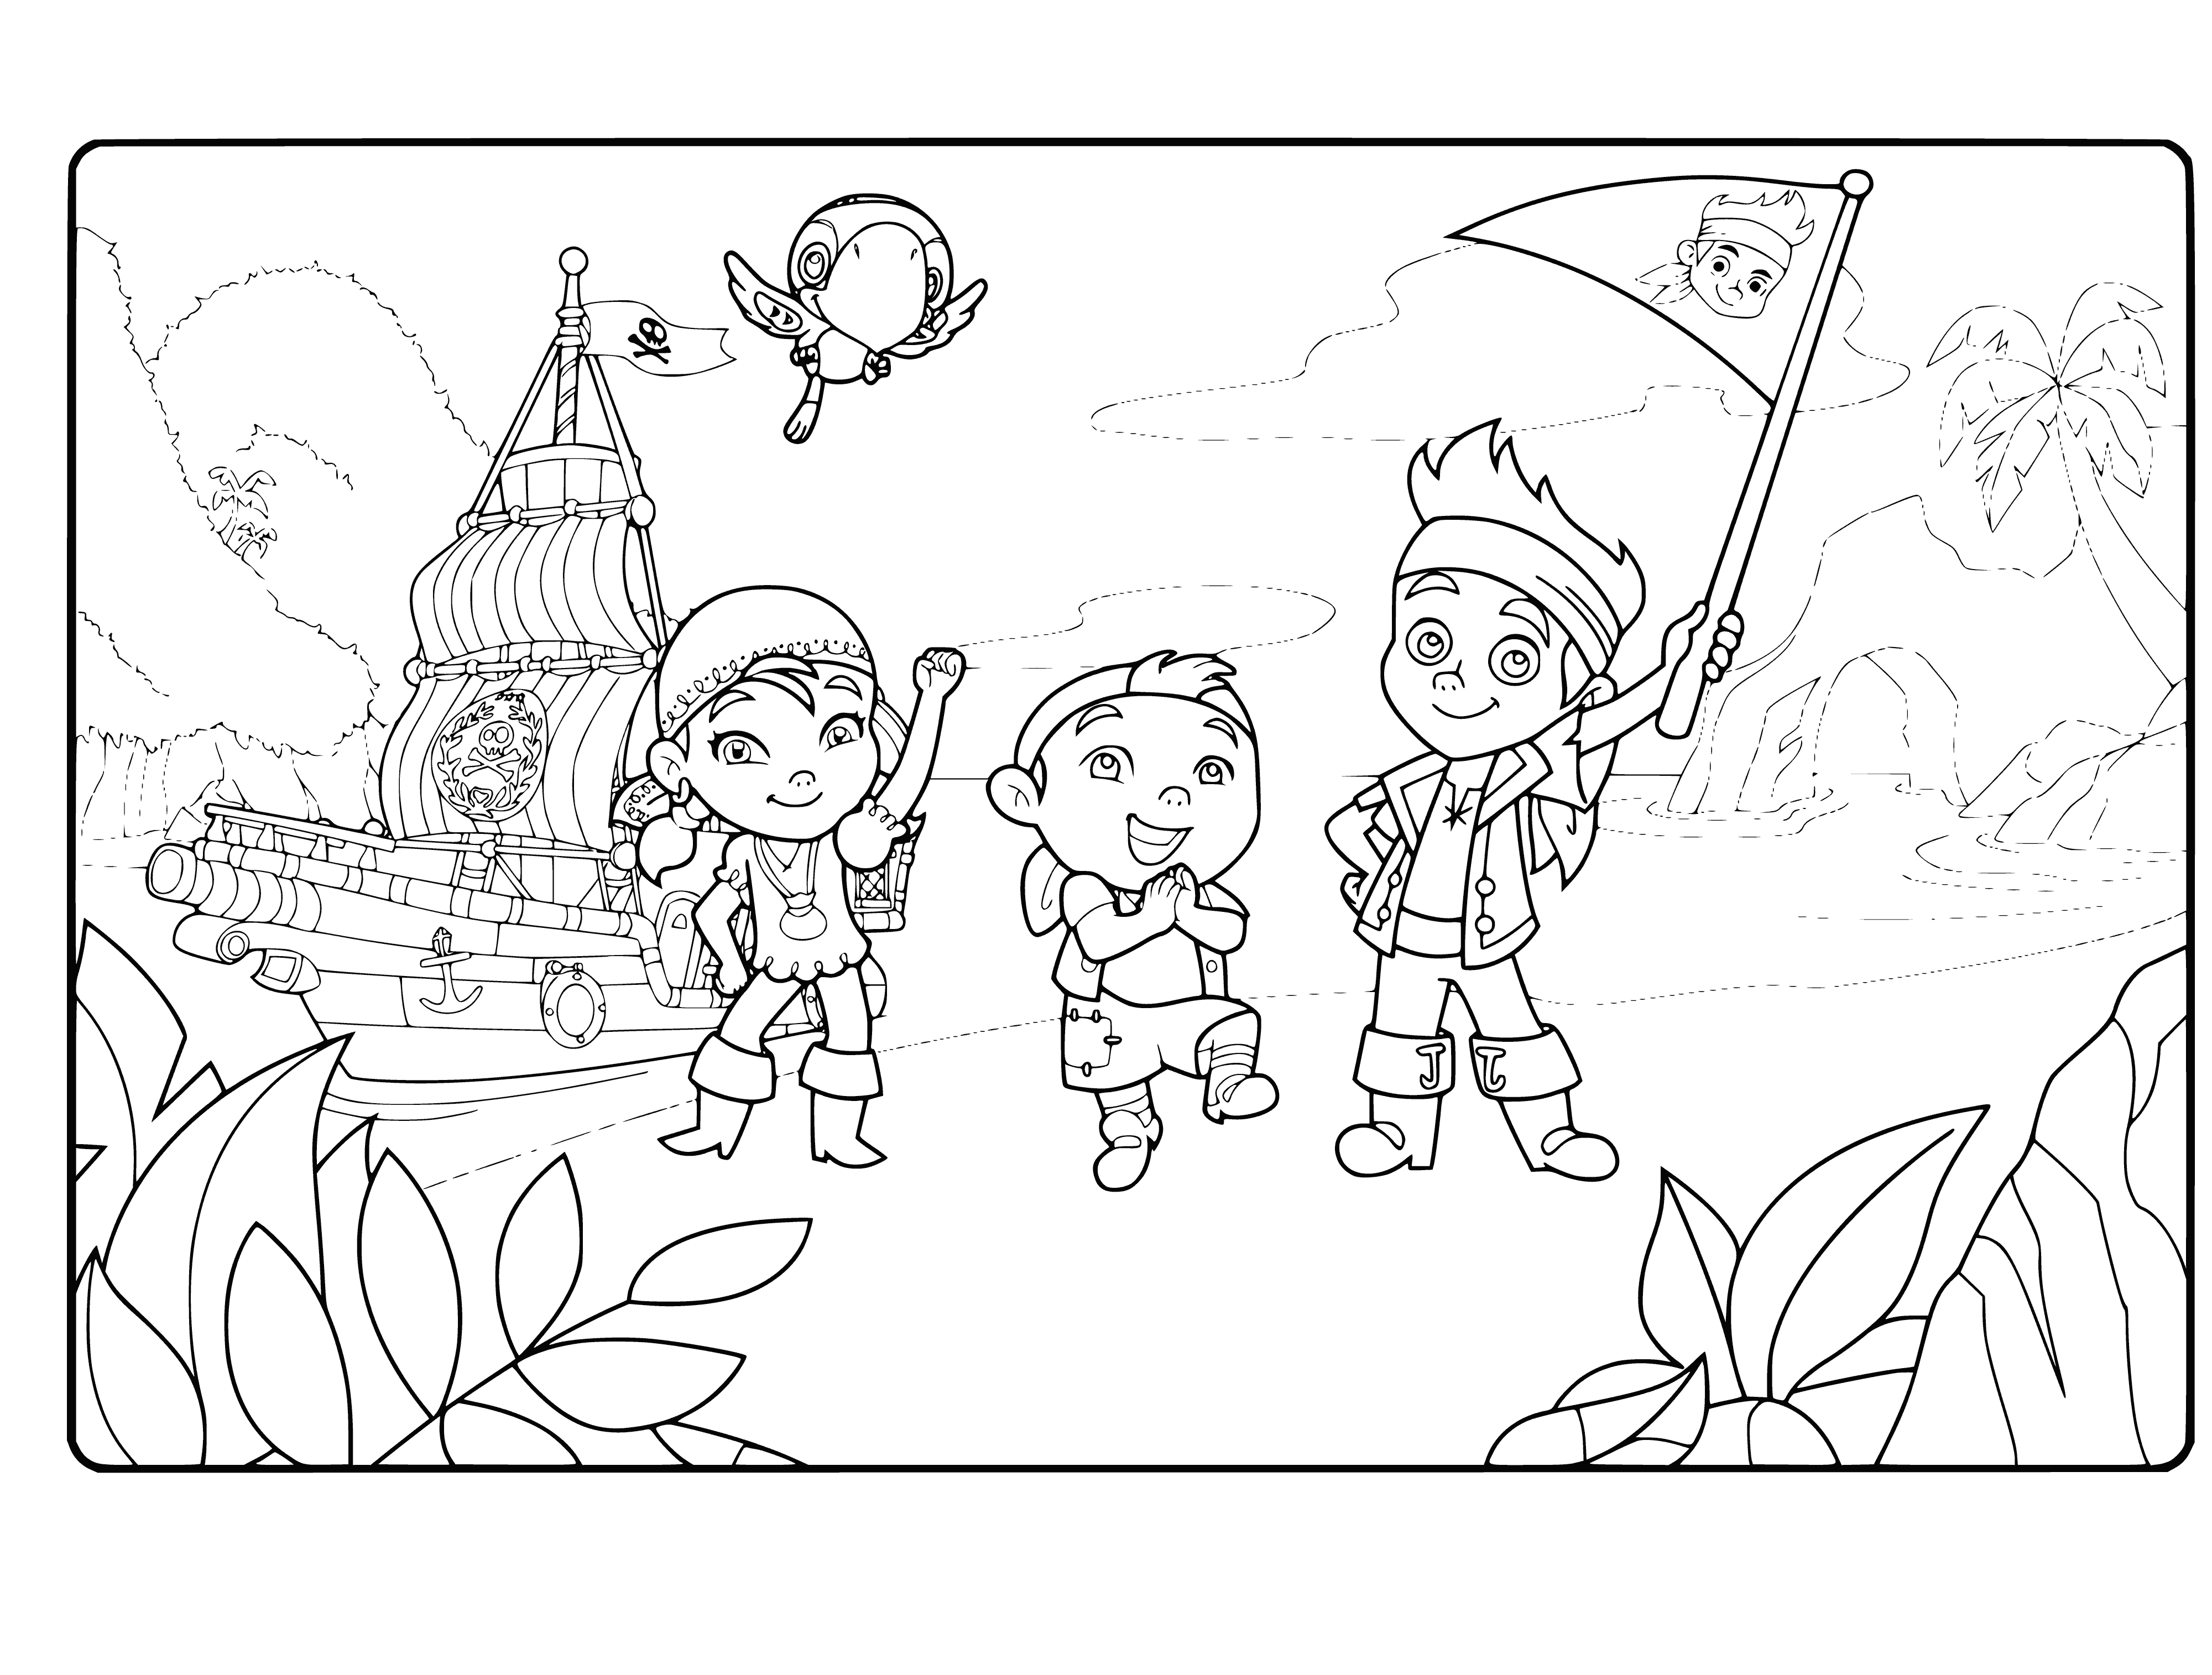 coloring page: 6 kids on dock wearing pirate clothes, 3 girls & 3 boys, 2 girls w/ black hair, 1 girl w/ brown hair, 2 boys w/ brown & 1 w/ black hair. Pirate ship in water sails up.